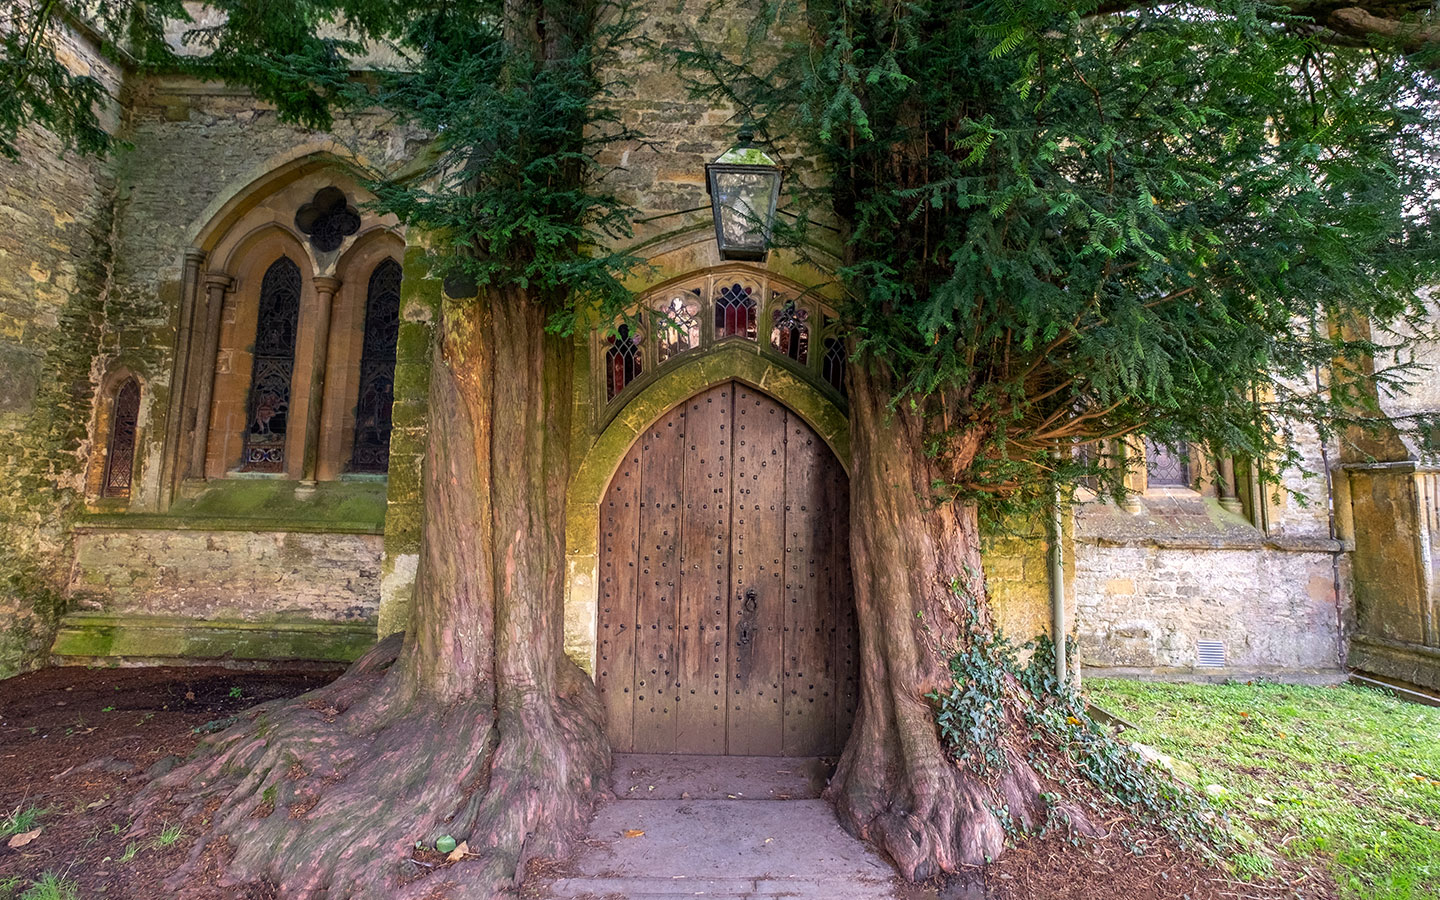 Yew tree door in St Edward’s Church in Stow-on-the-Wold